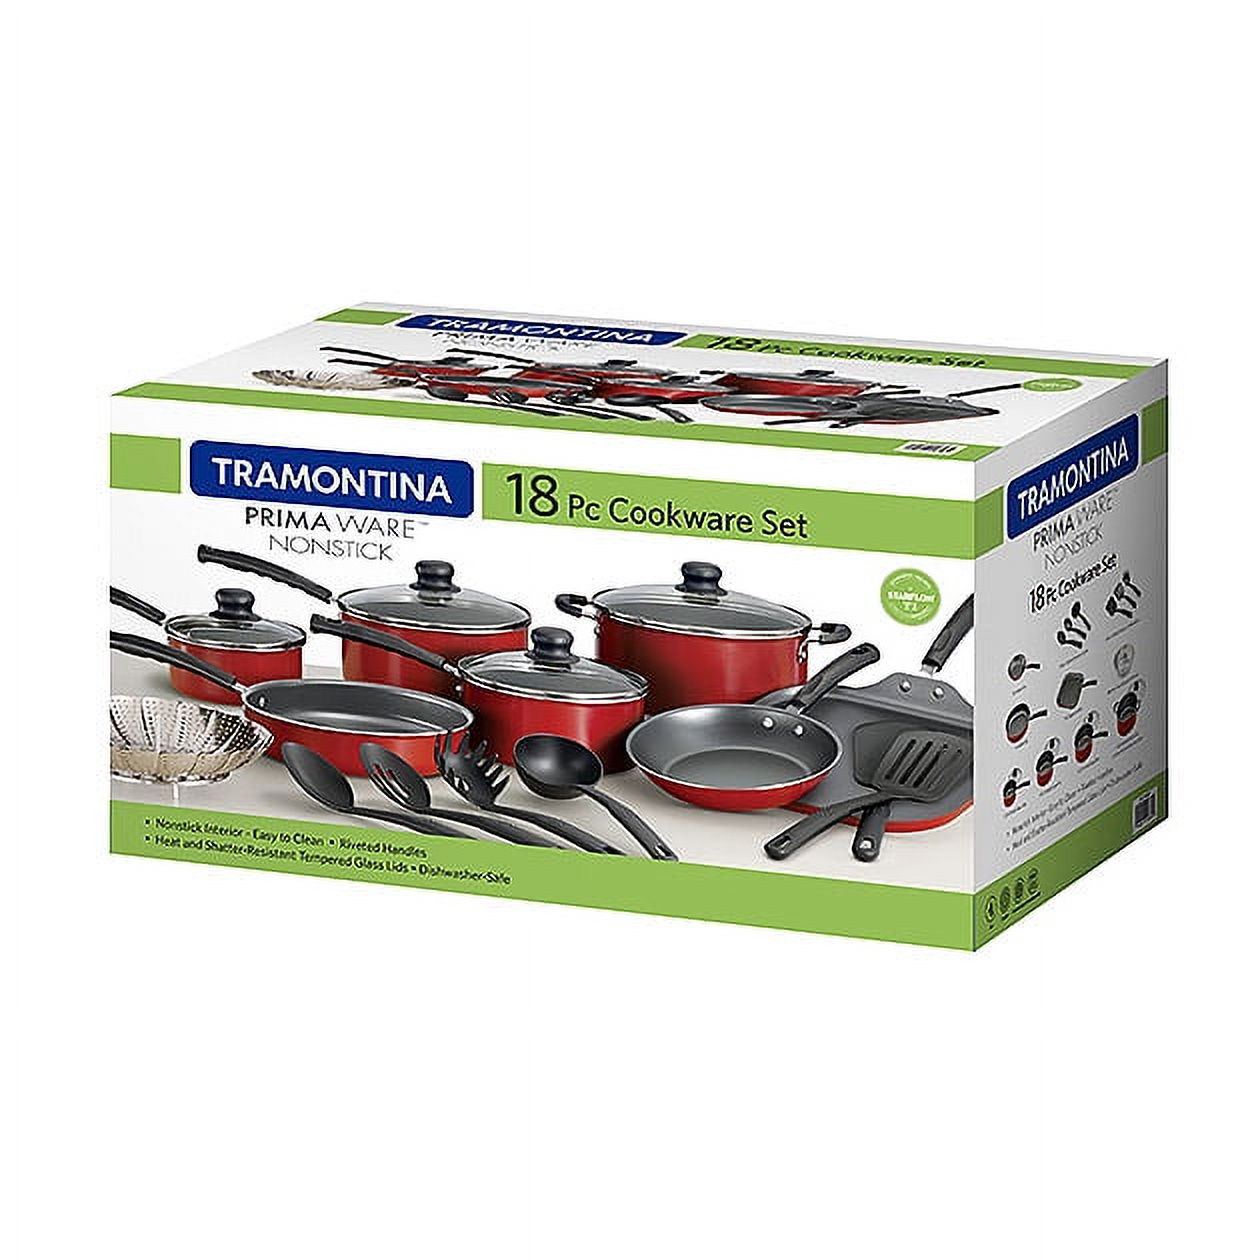 Tramontina Primaware 18 Piece Non-stick Cookware Set, Red - image 4 of 27